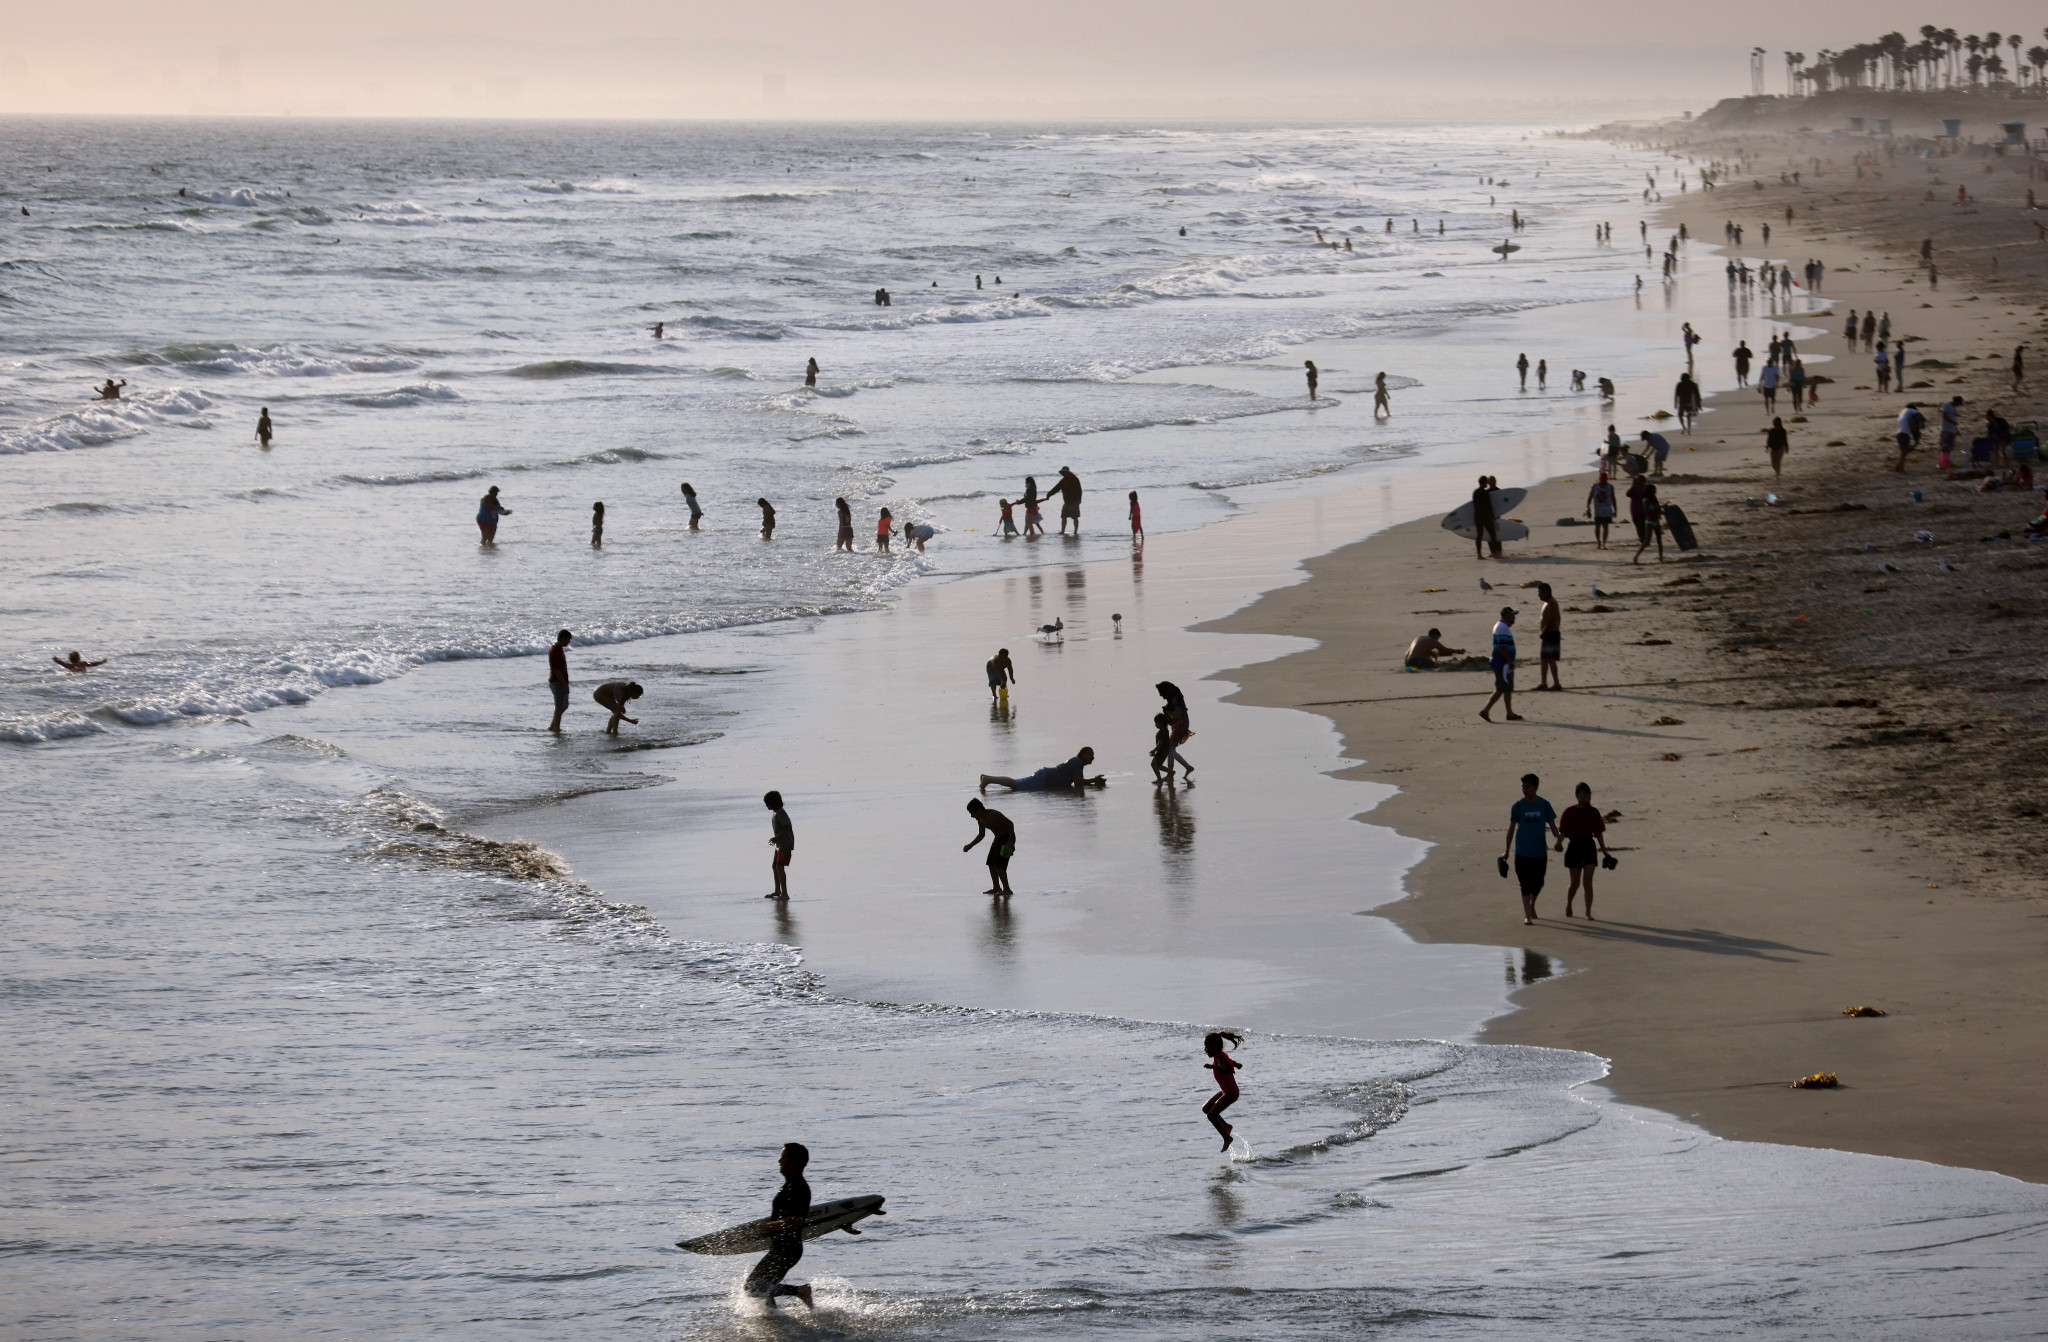 Huntington Beach City Council is eager to host the surfing, skateboarding and BMX events at Los Angeles 2028 ©Getty Images